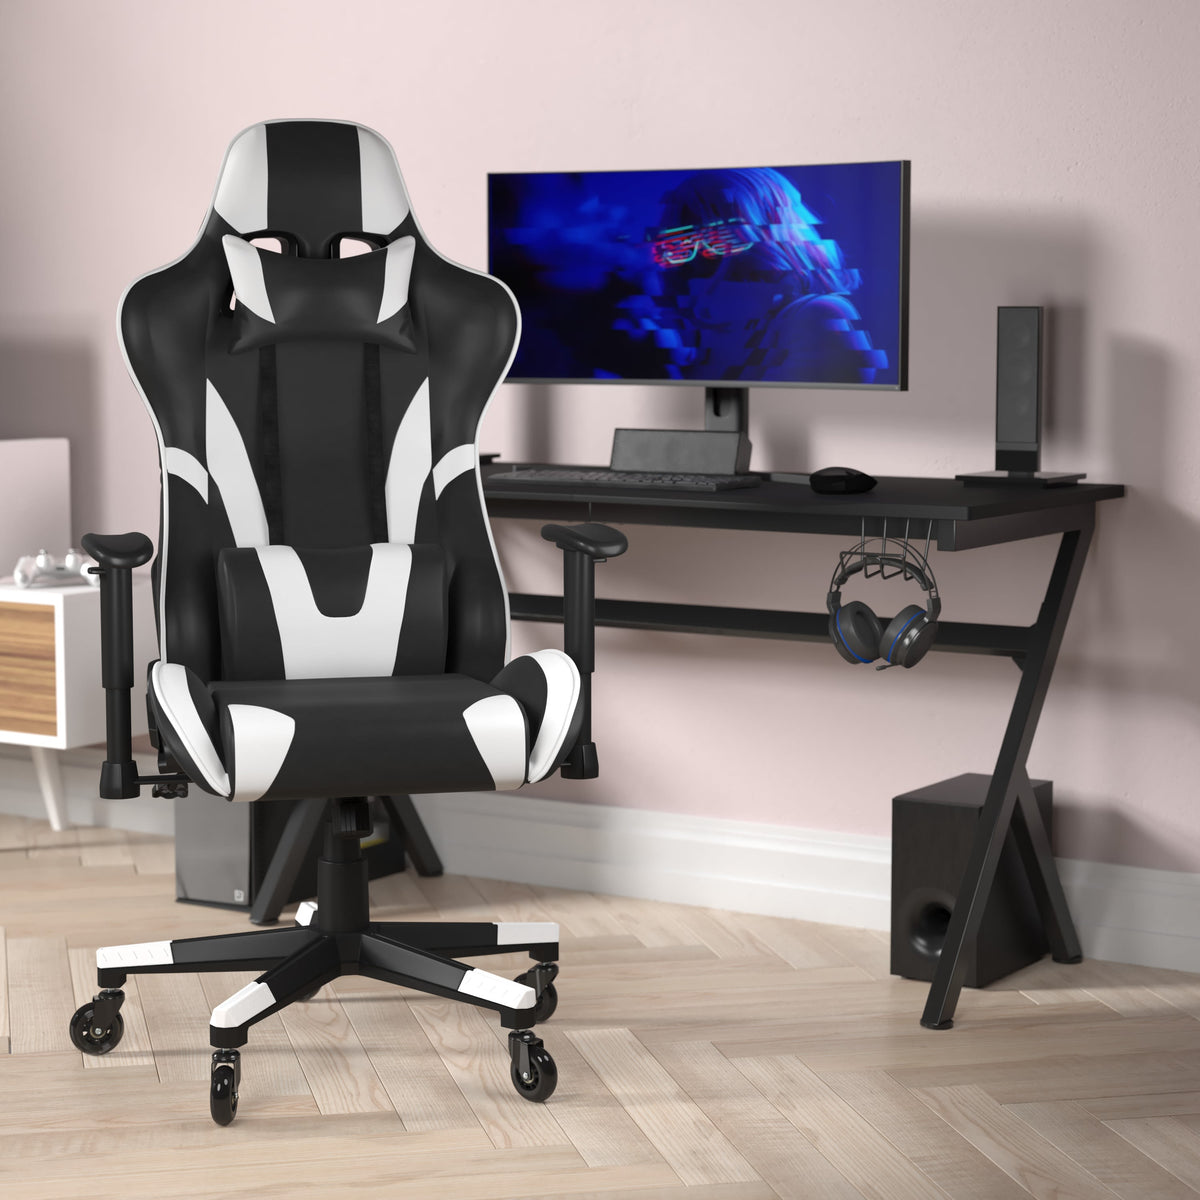 Black |#| Office Gaming Chair with Roller Wheels & Reclining Back - Black LeatherSoft